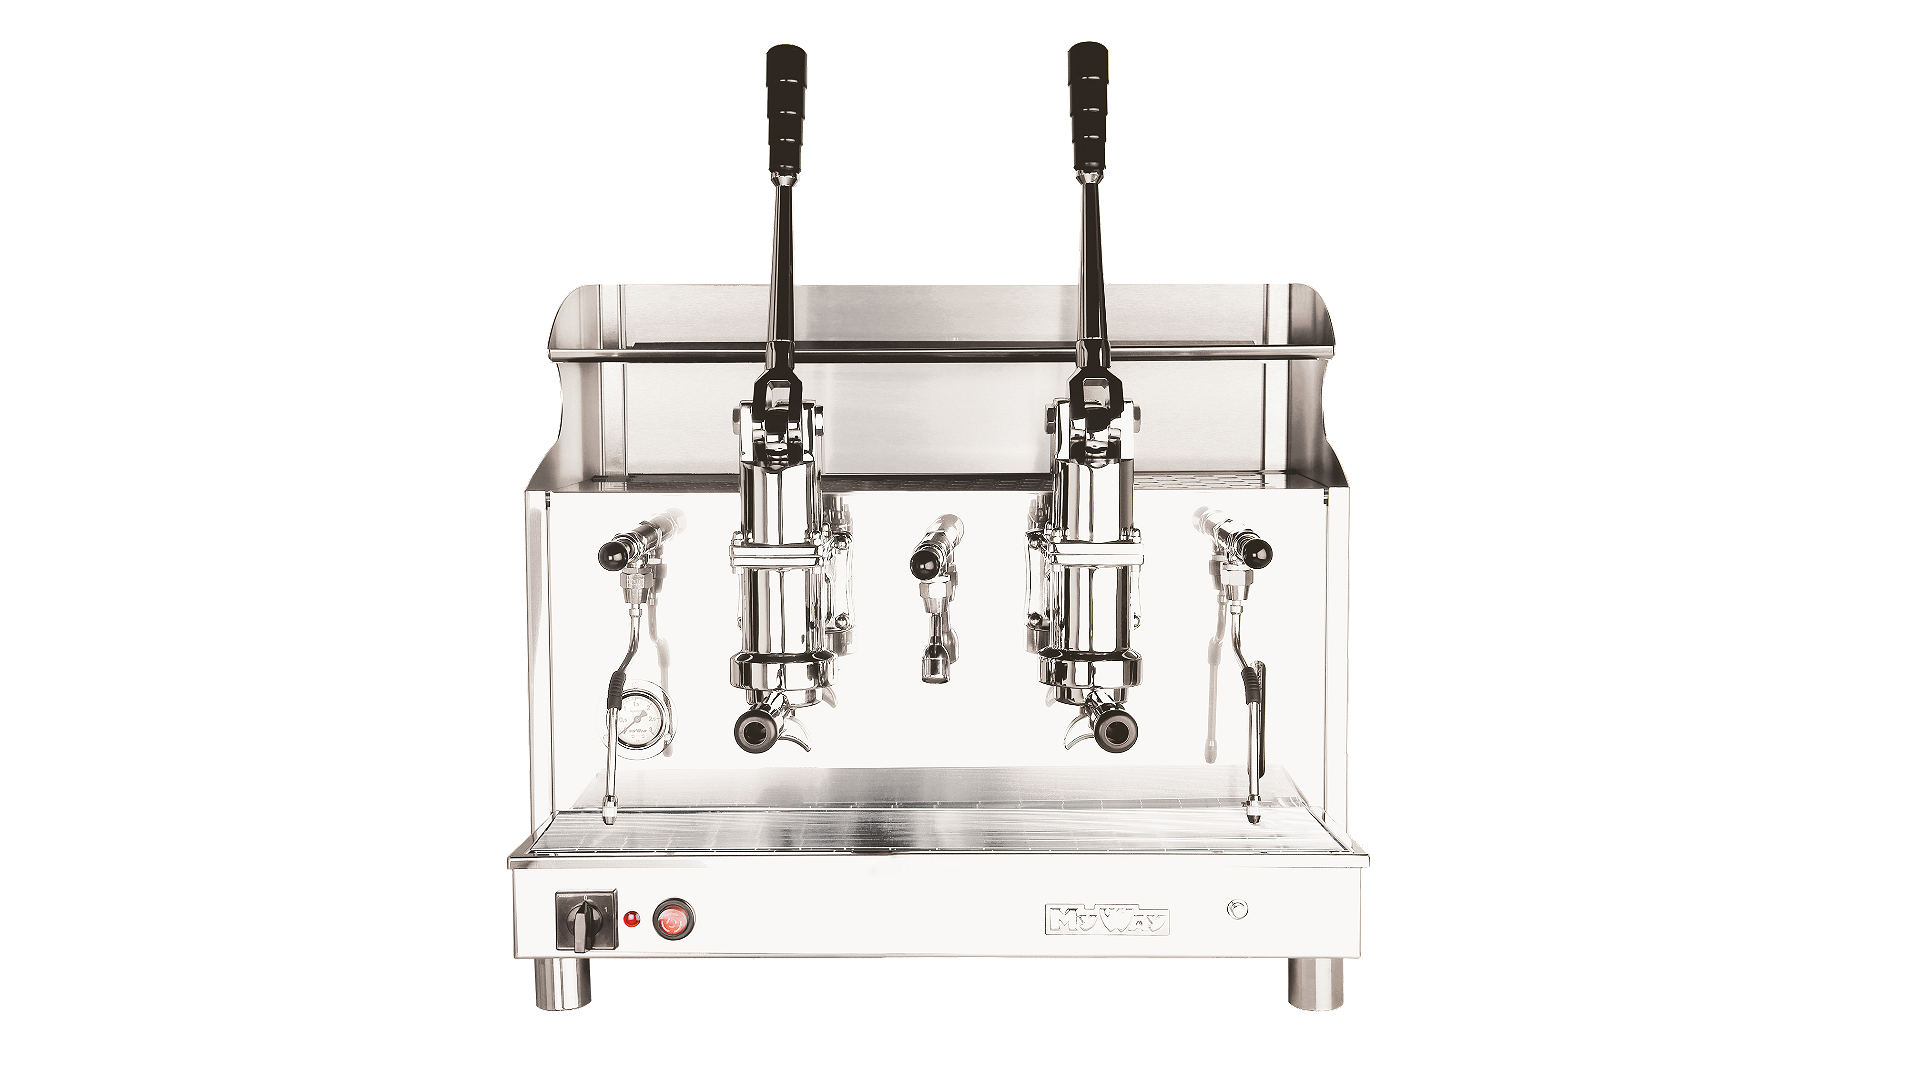 The IZZO commercial espresso machine for the UK